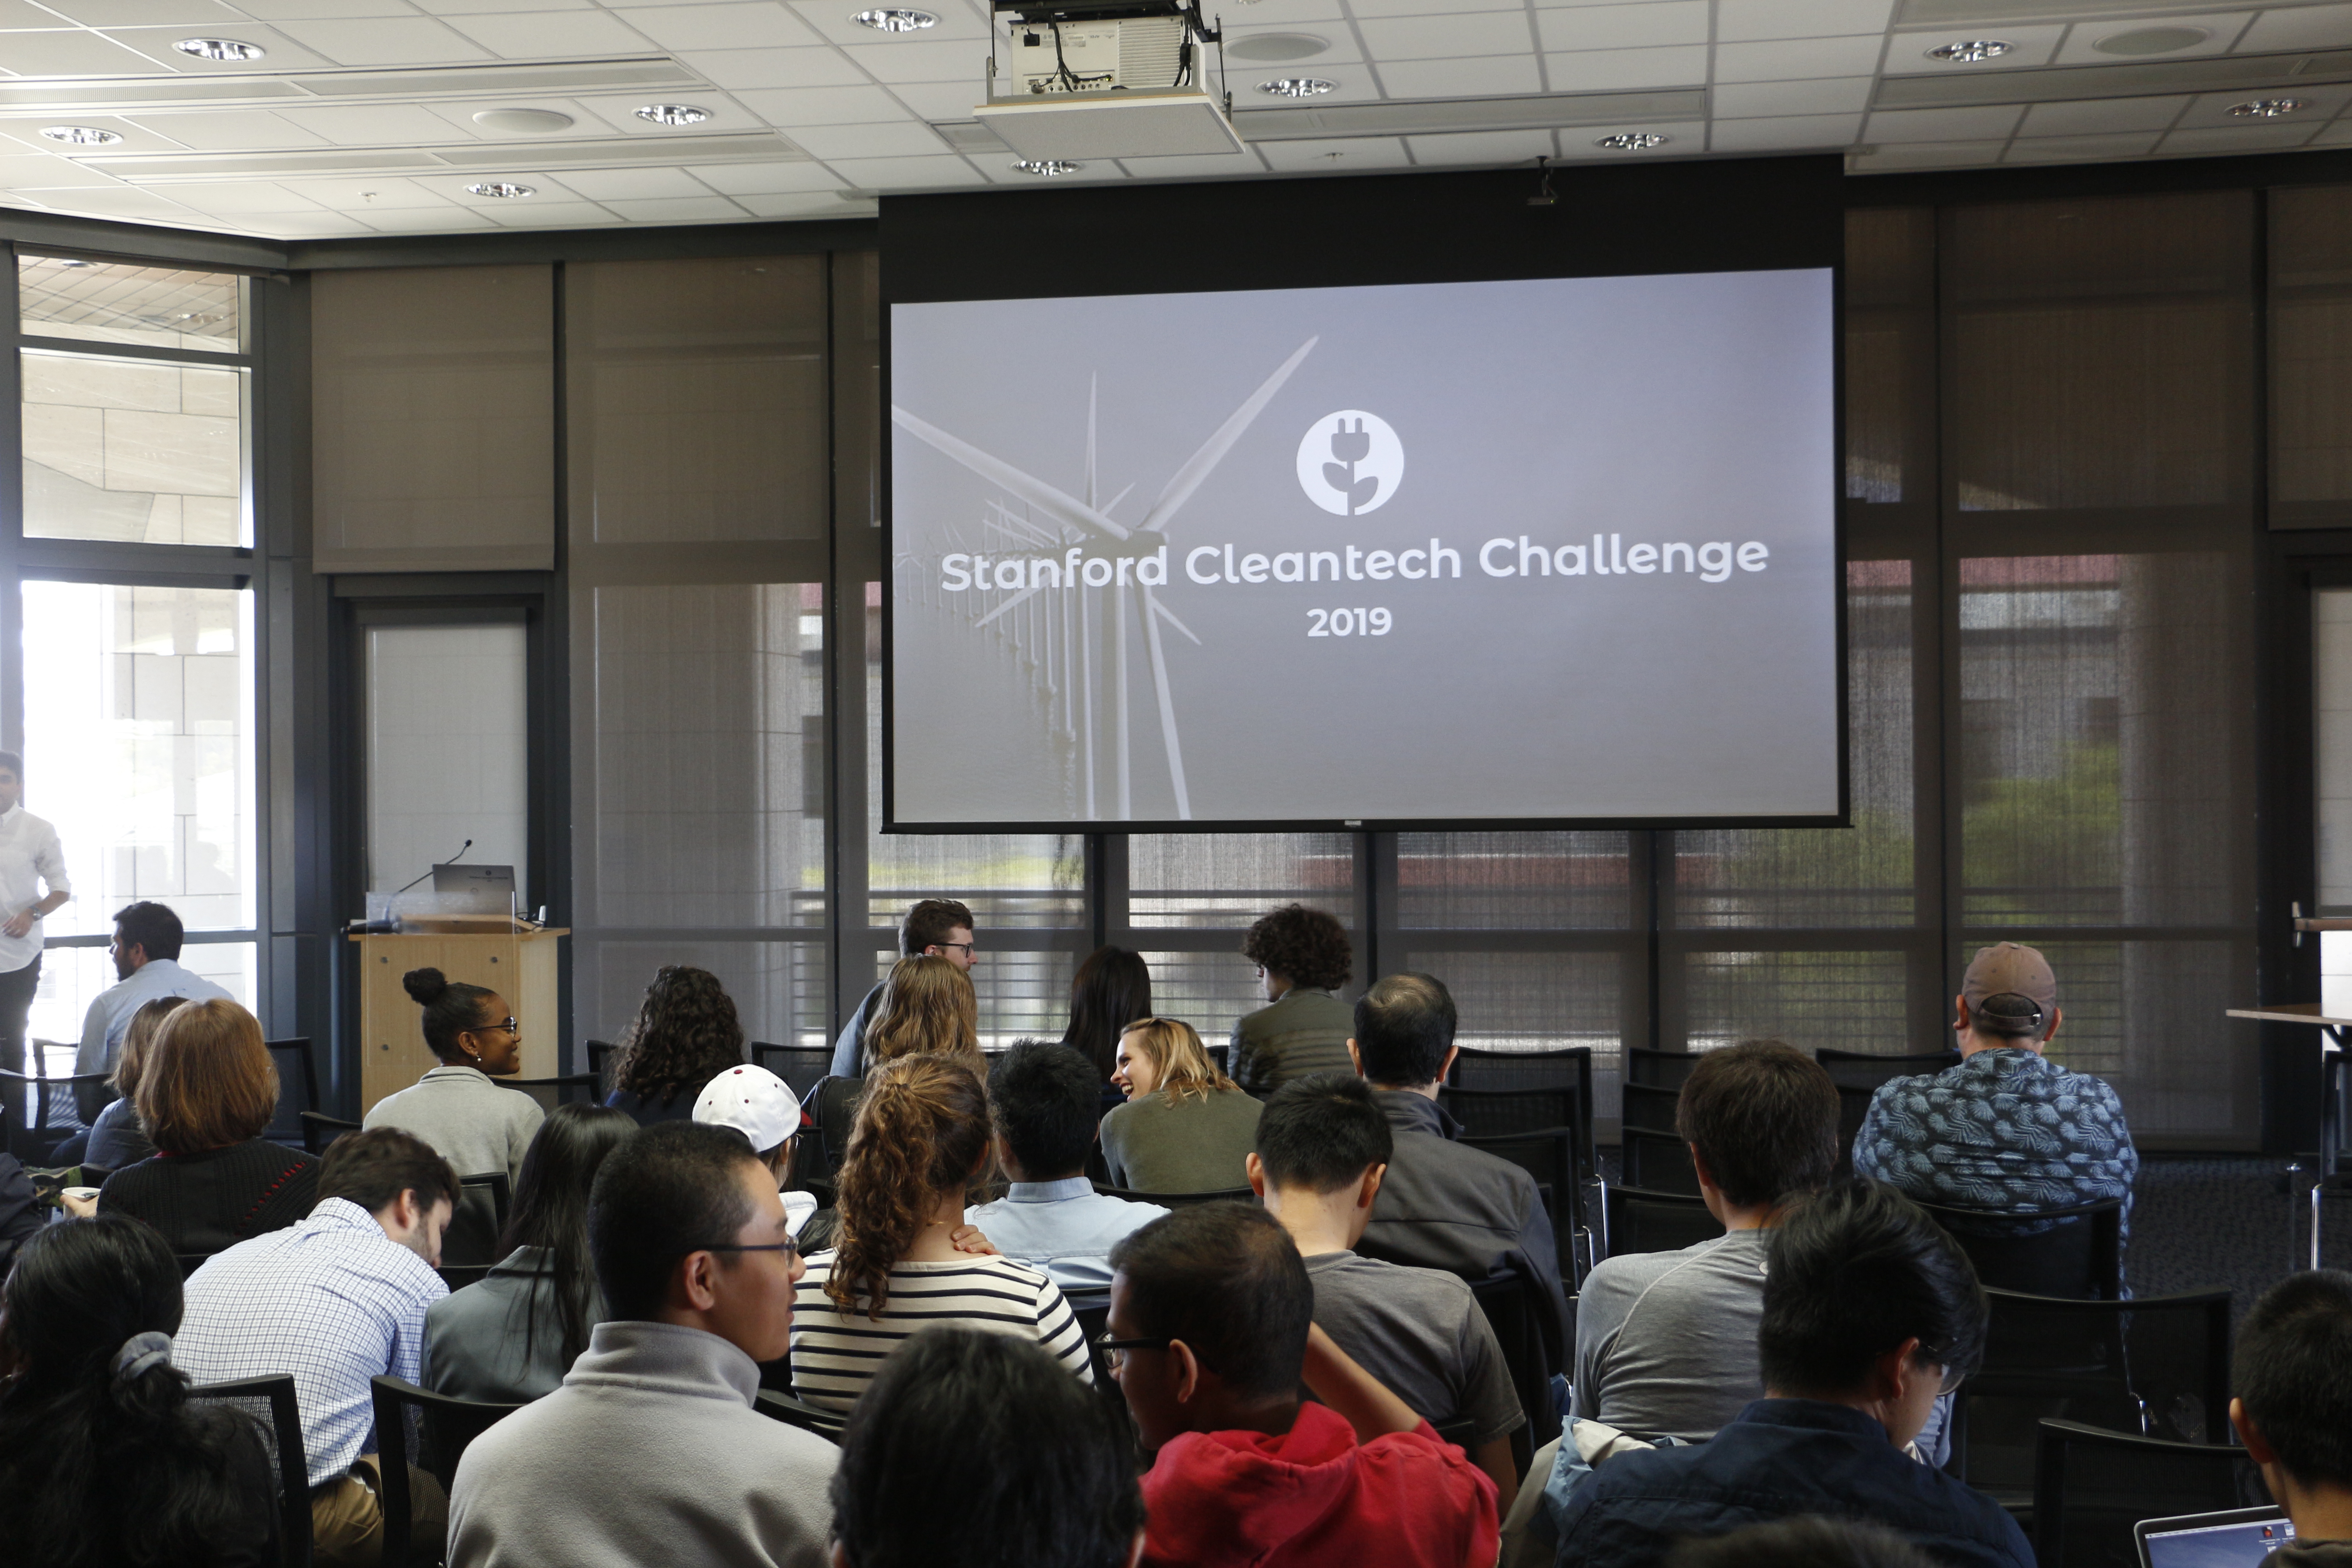 Audience at Stanford Cleantech Challenge 2019